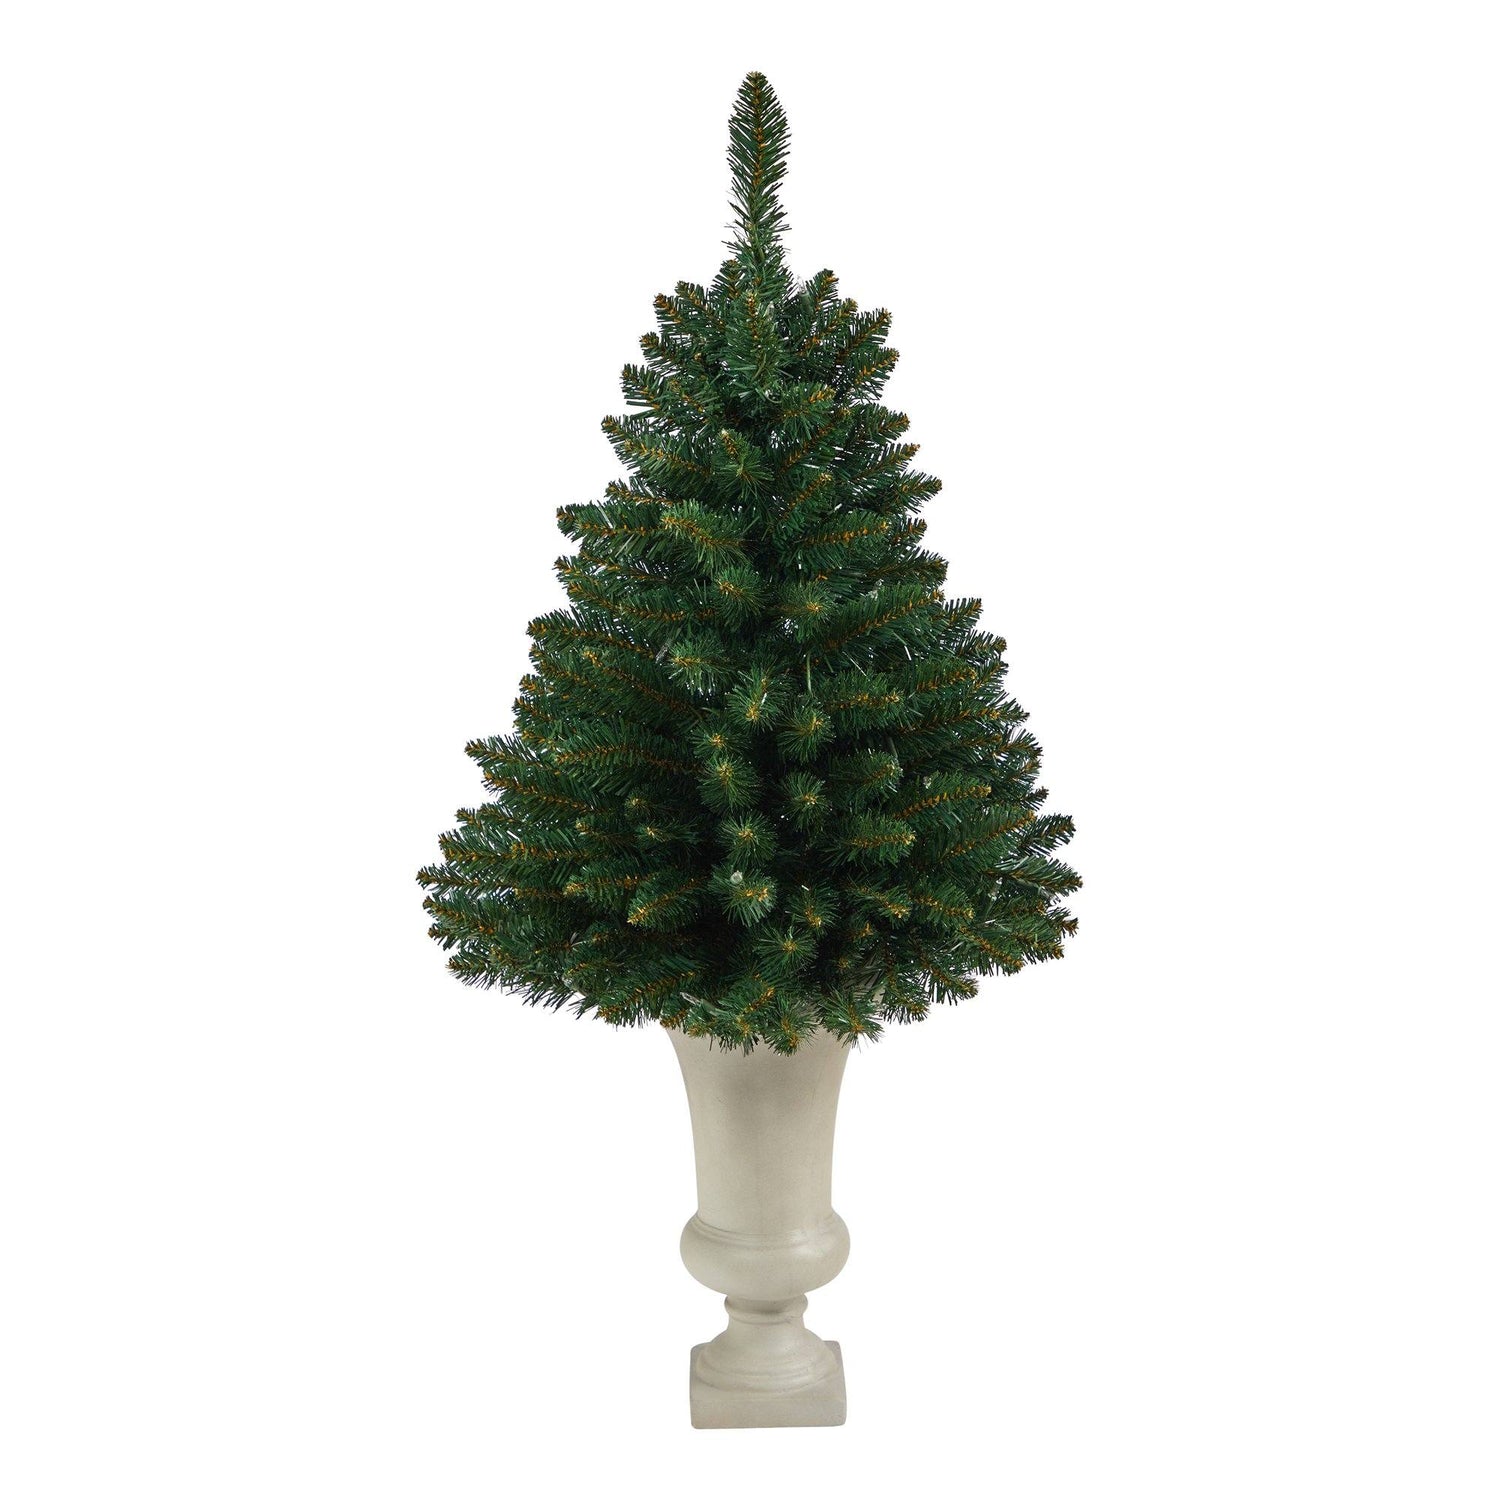 3.5’ Northern Rocky Spruce Artificial Christmas Tree with 50 Clear Lights and 154 Bendable Branches in Sand Colored Urn